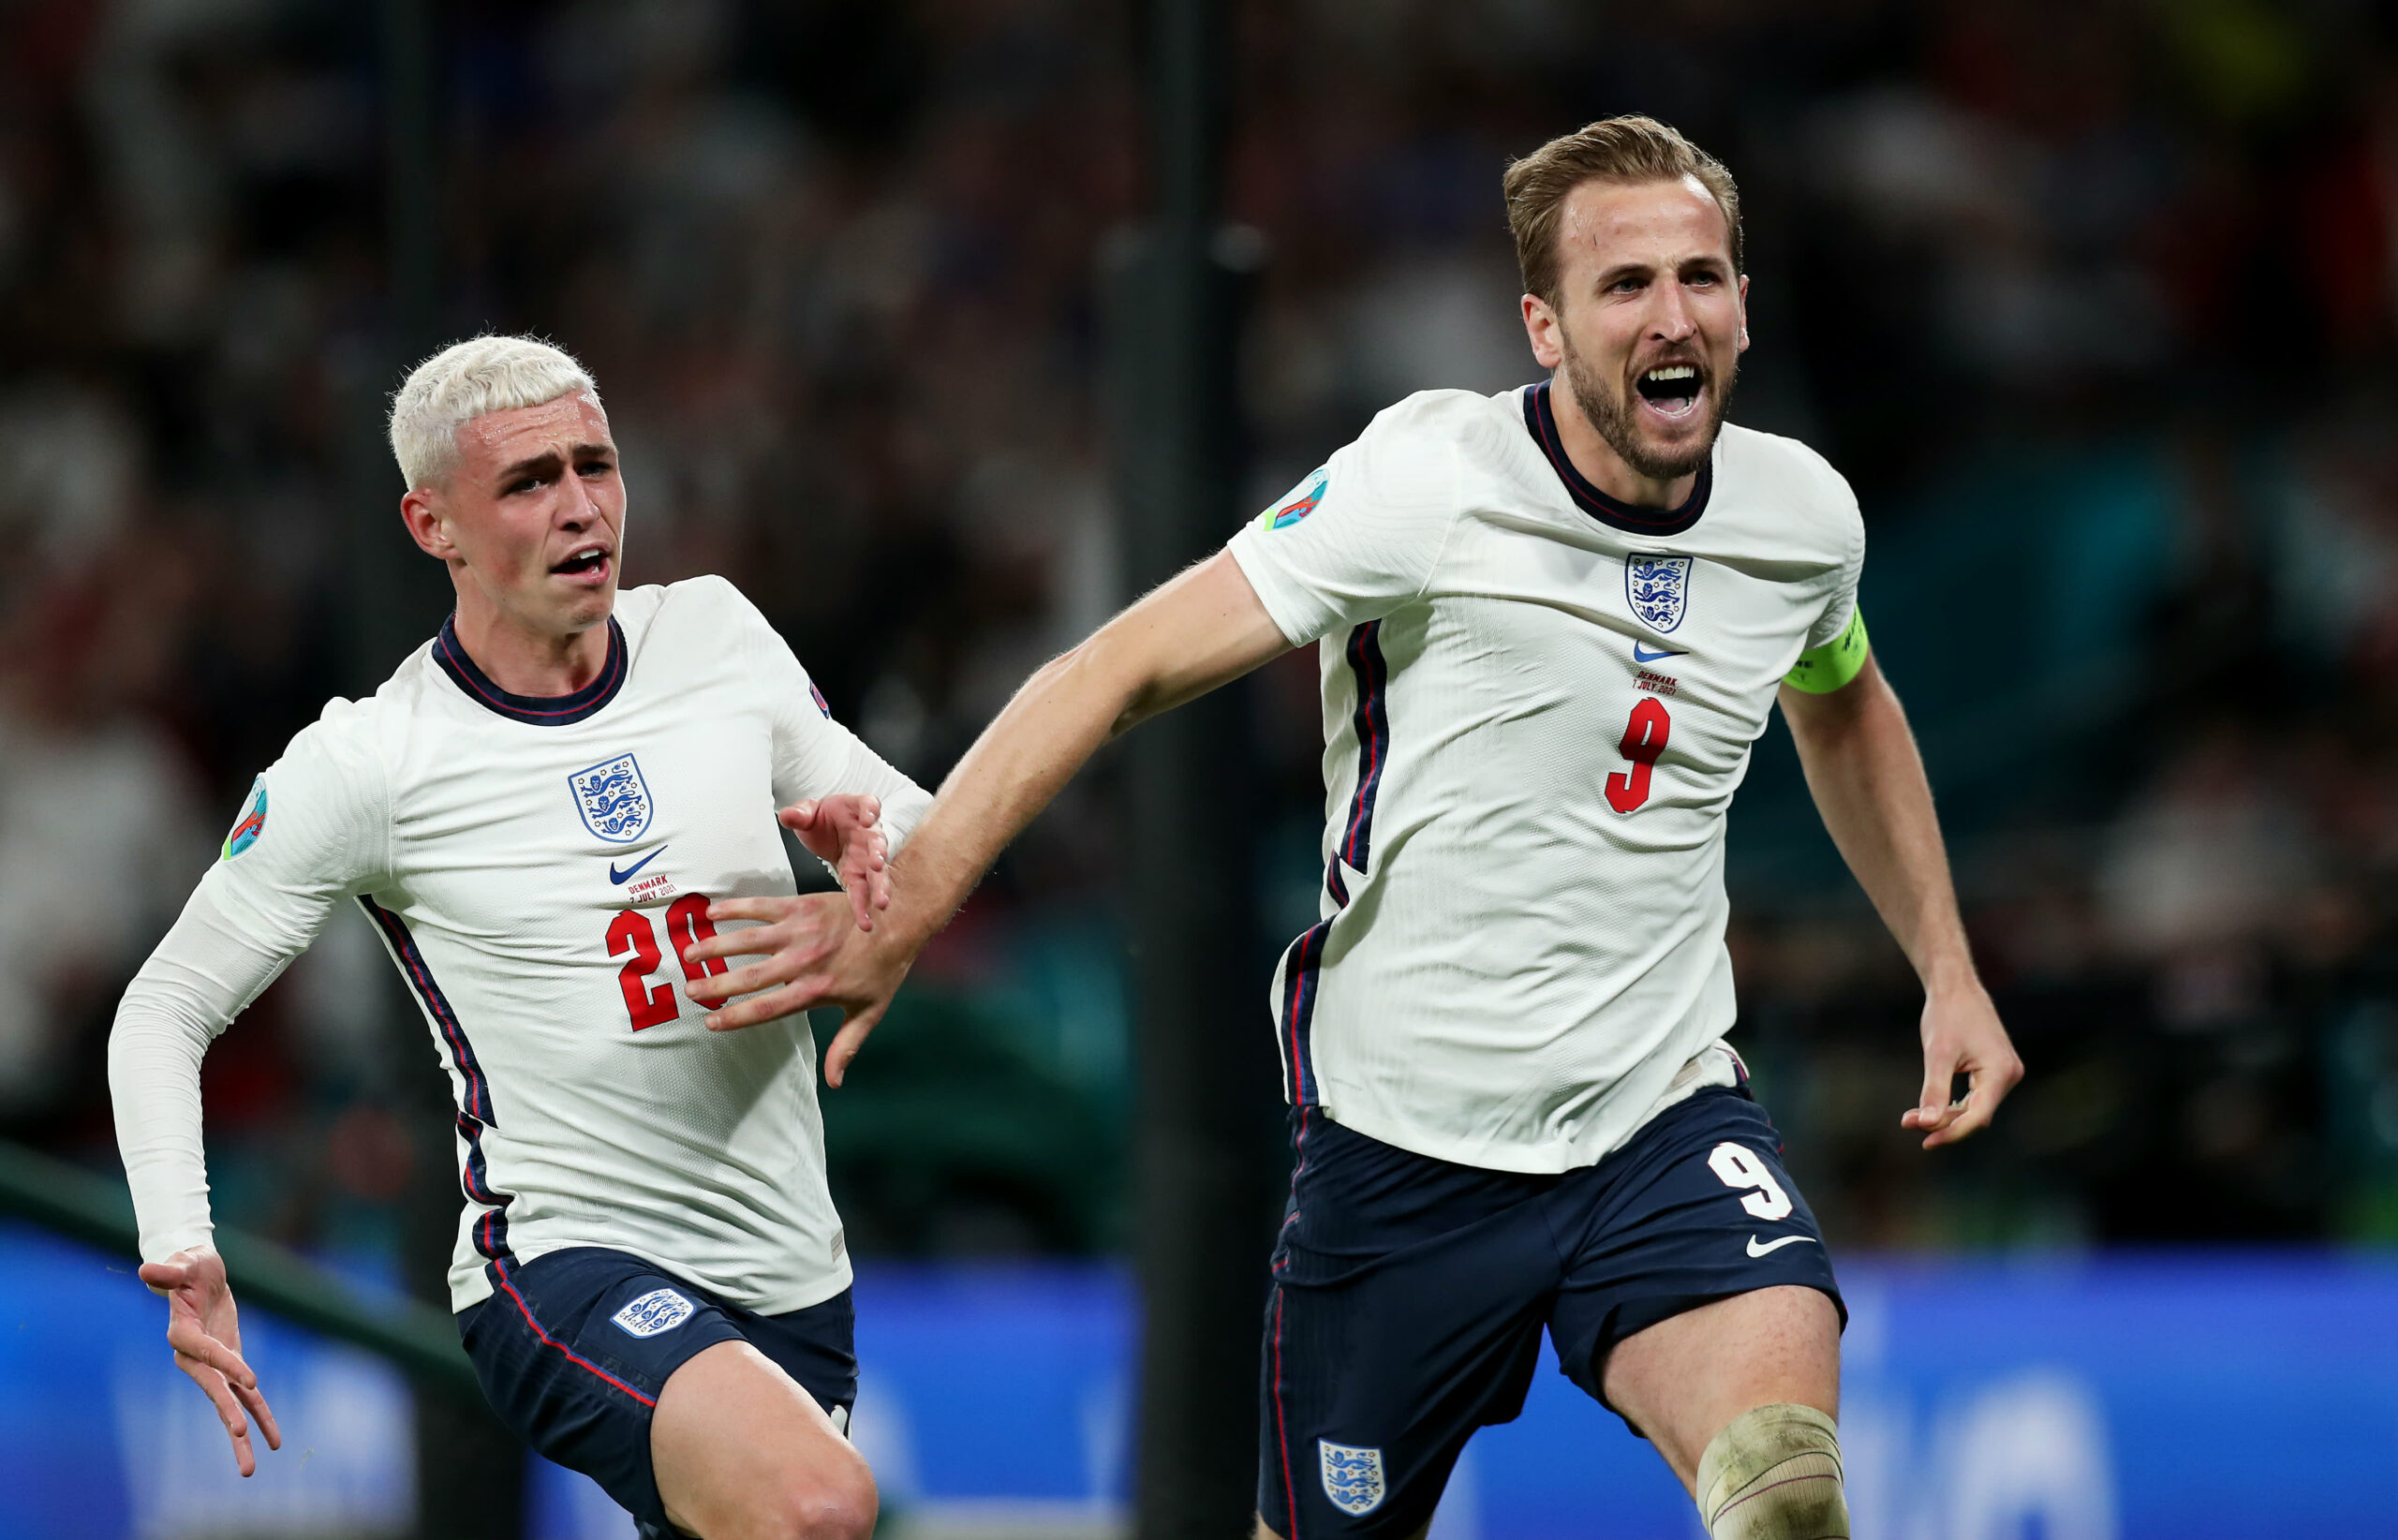 England to face Italy in last after beating Denmark 2-1